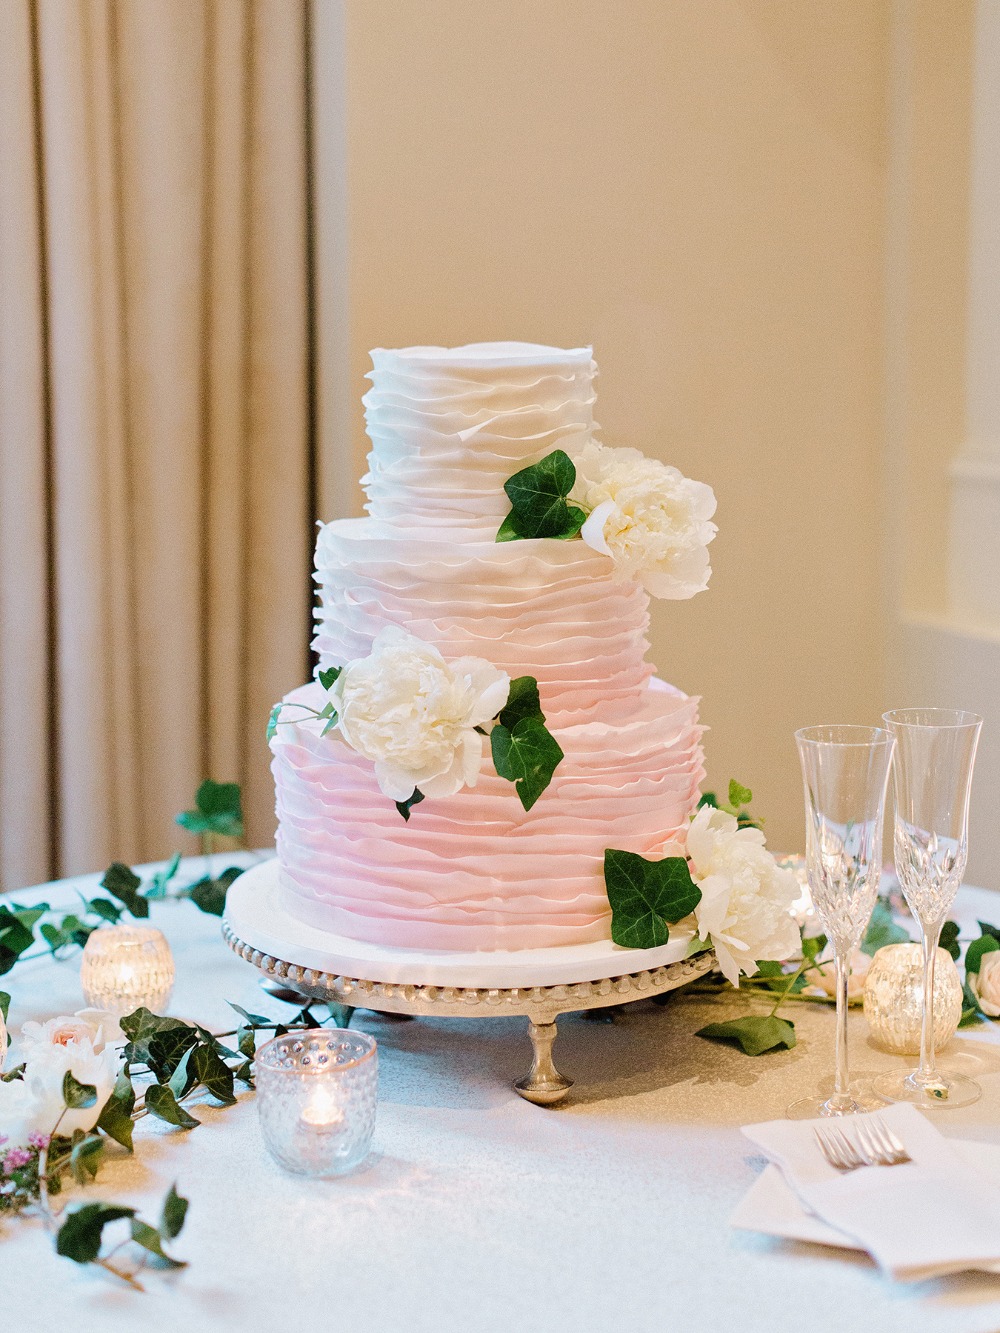 Blush ombre wedding cake with ruffles